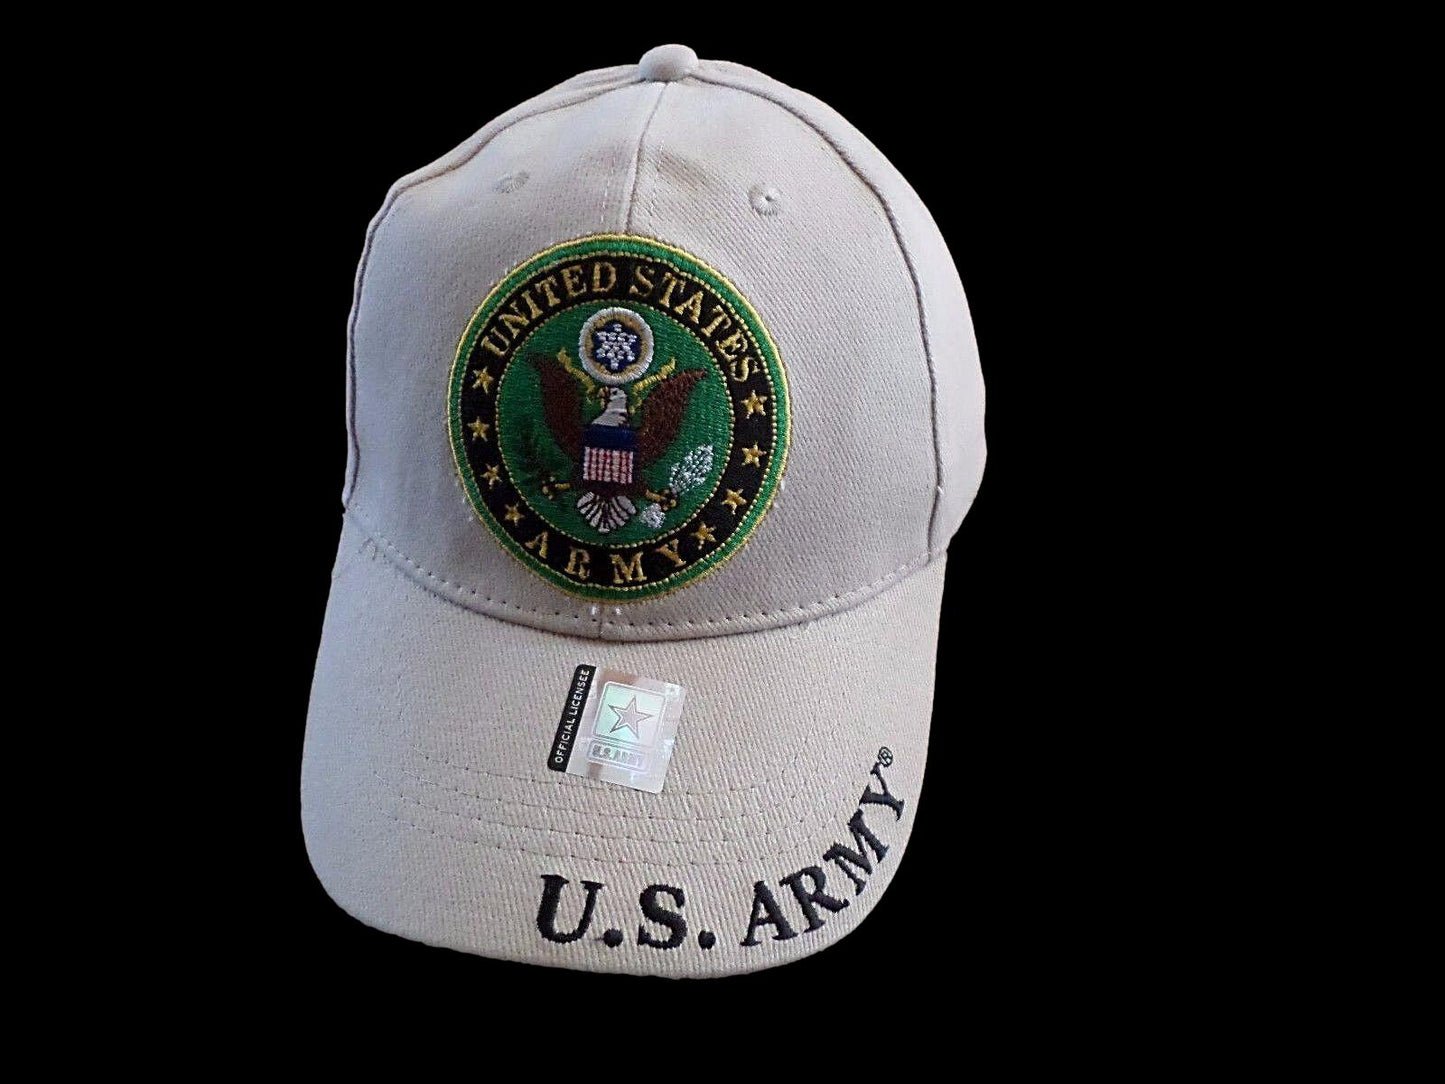 NEW U.S MILITARY ARMY LOGO EMBROIDERED KHAKI HAT CAP OFFICIAL LICENSED HATS